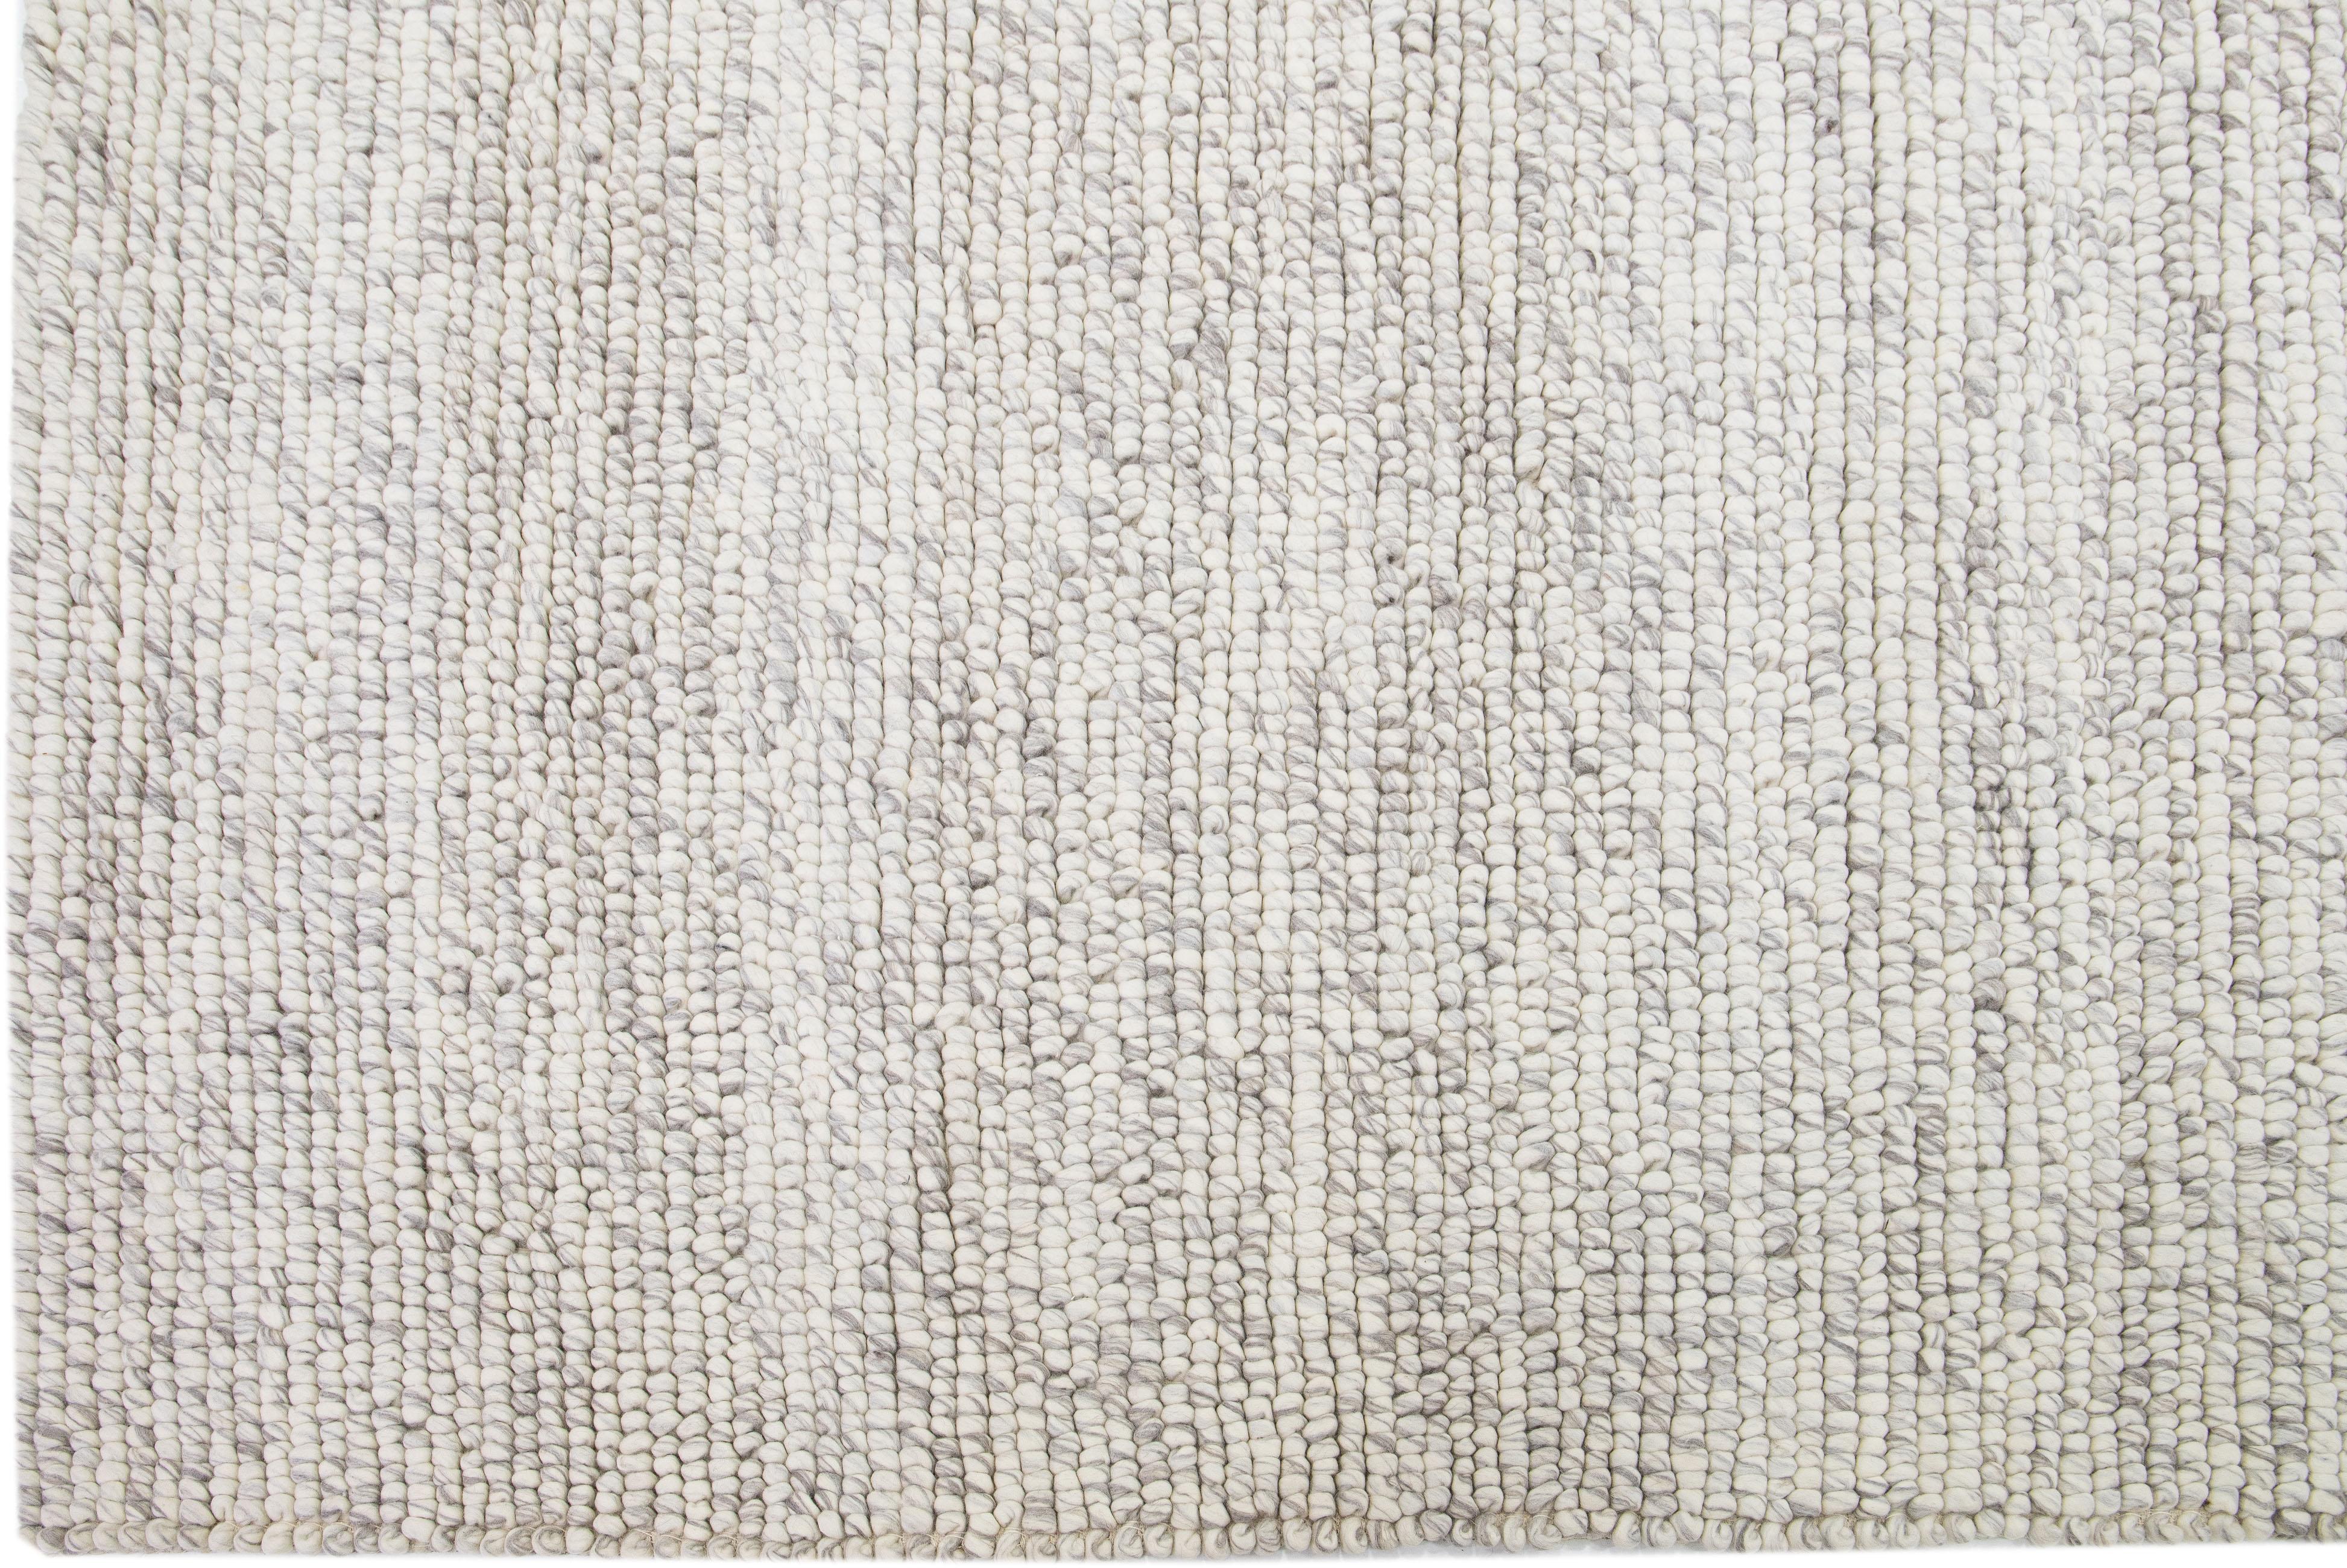 Hand-Woven Beige Modern Felted Textuted Wool Rug by Apadana For Sale